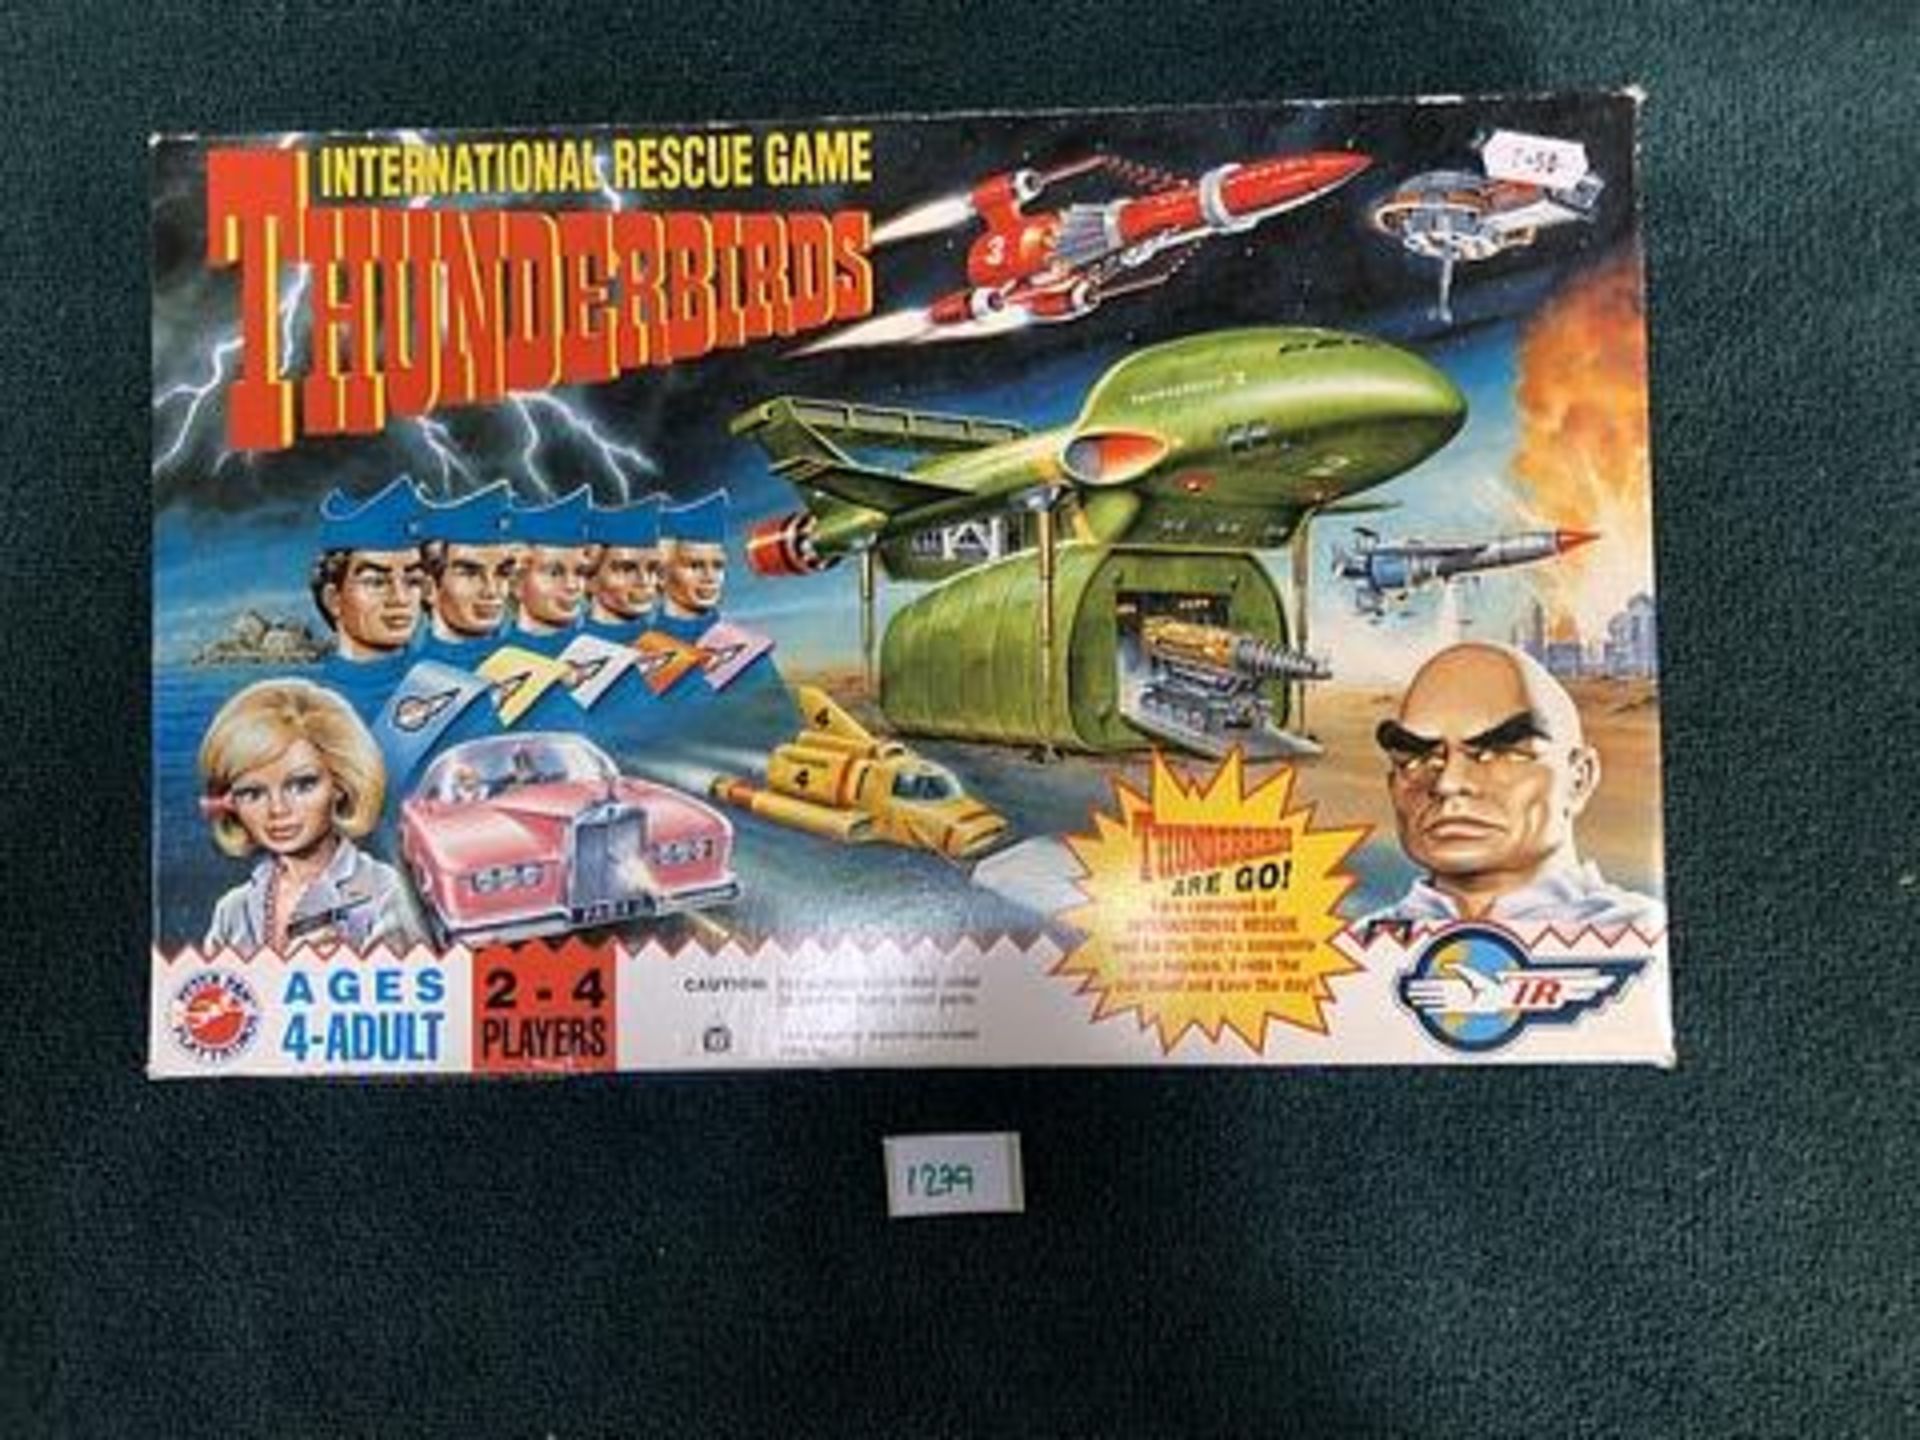 Peter Pan Playtings Thunderbirds International Rescue Game Complete With Box